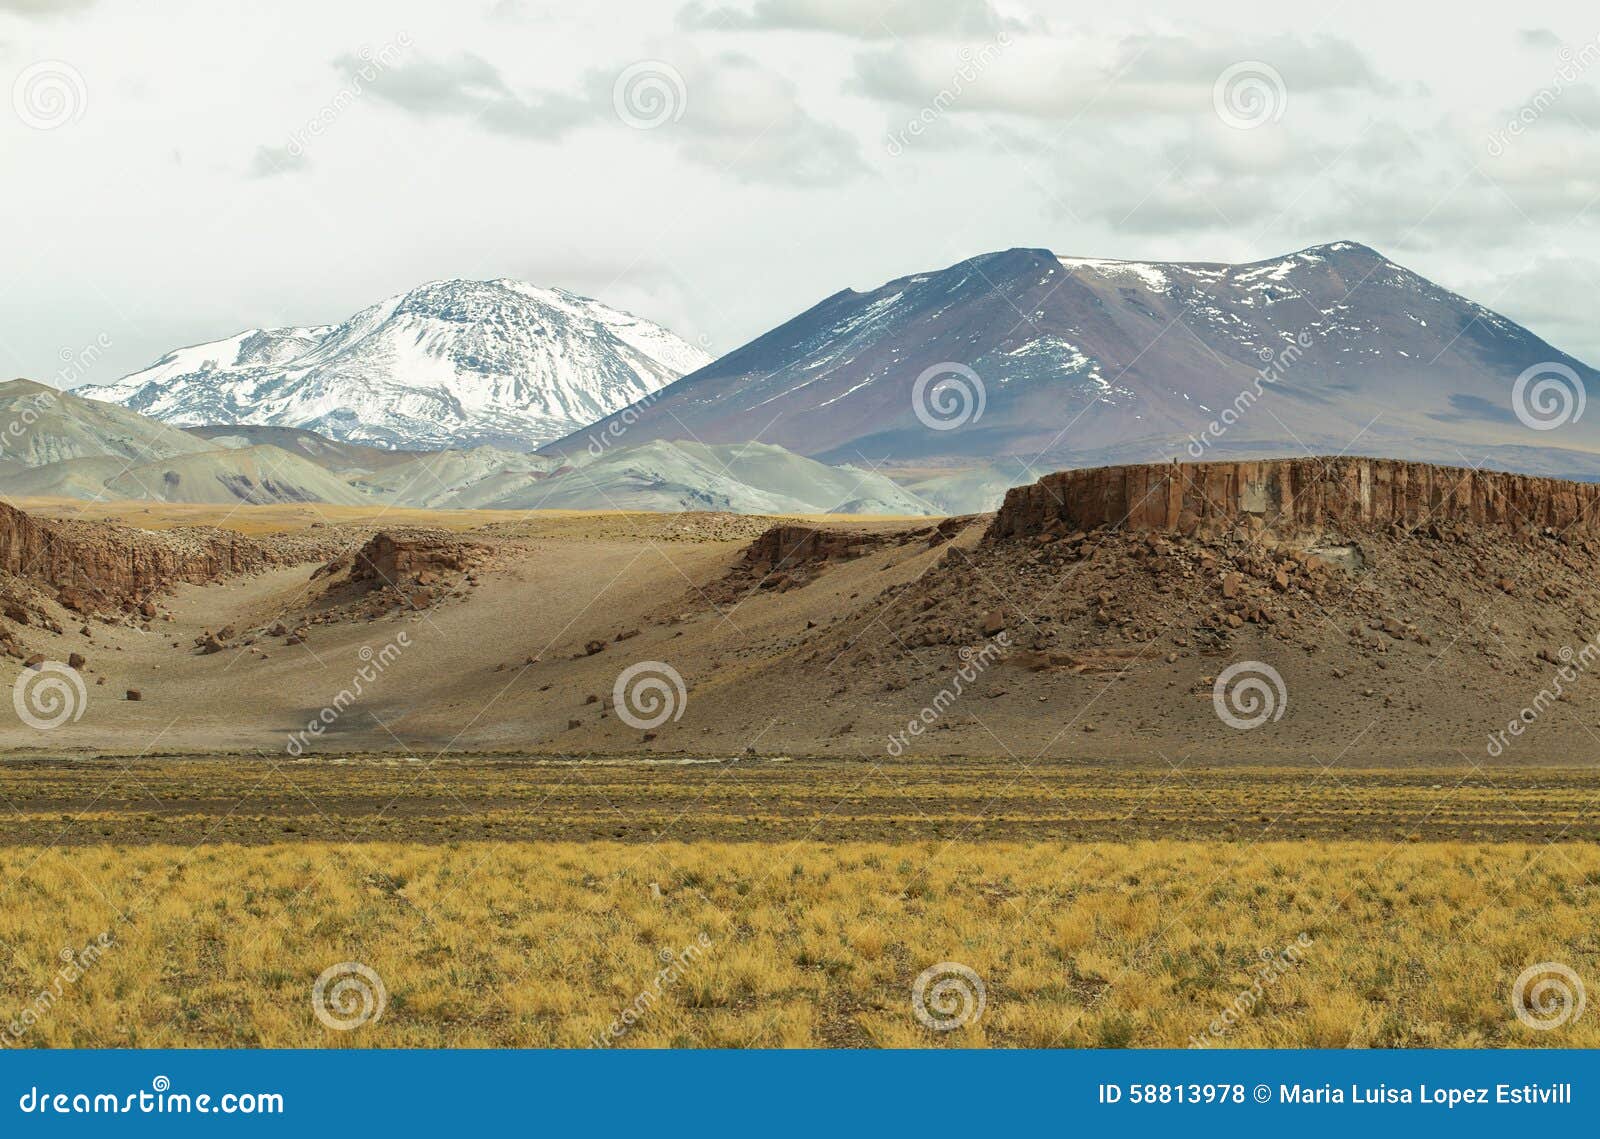 view of mountains and rock formations in sico pass